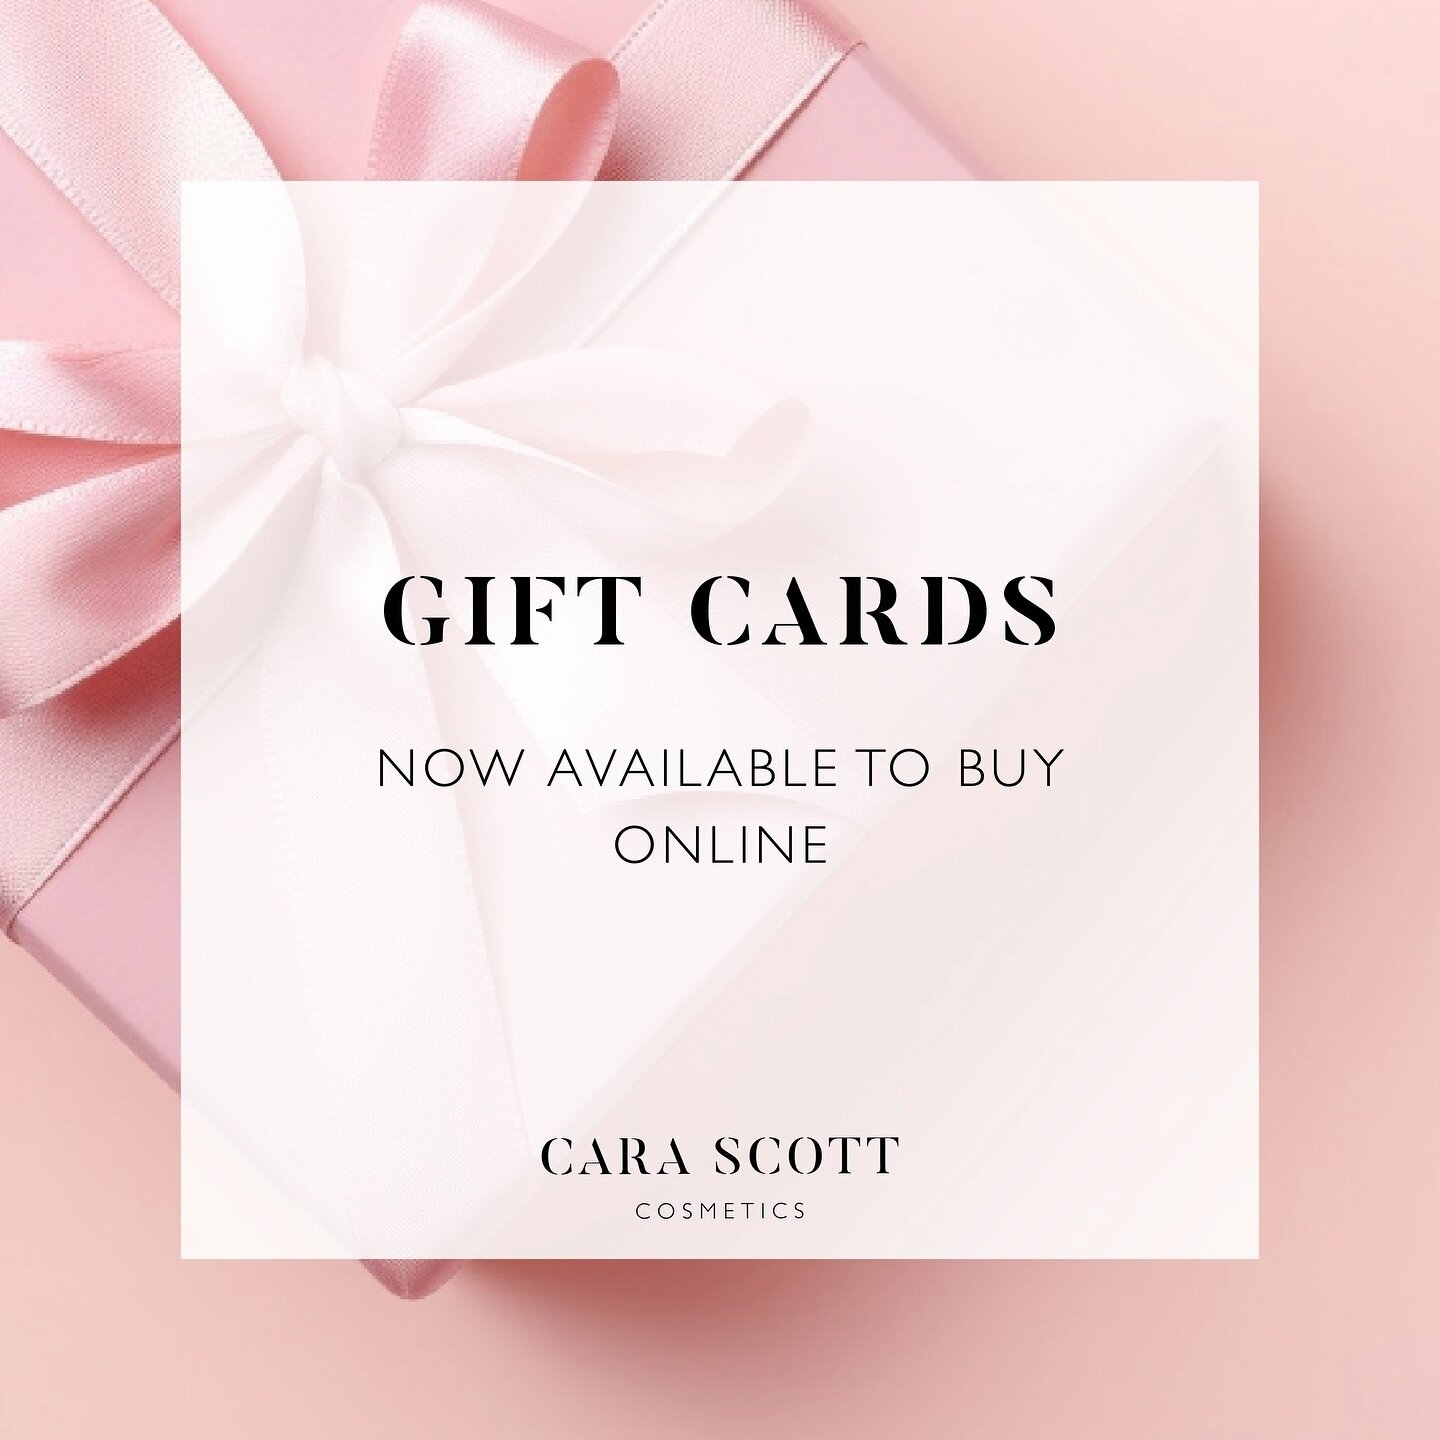 Still looking for a unique and wonderful Christmas gift? Why not give the gift of beautiful brows this Christmas?

I&rsquo;m thrilled to be announcing my new Gift Card launch, just in time for the festive season.

Spread joy this time of year with a 